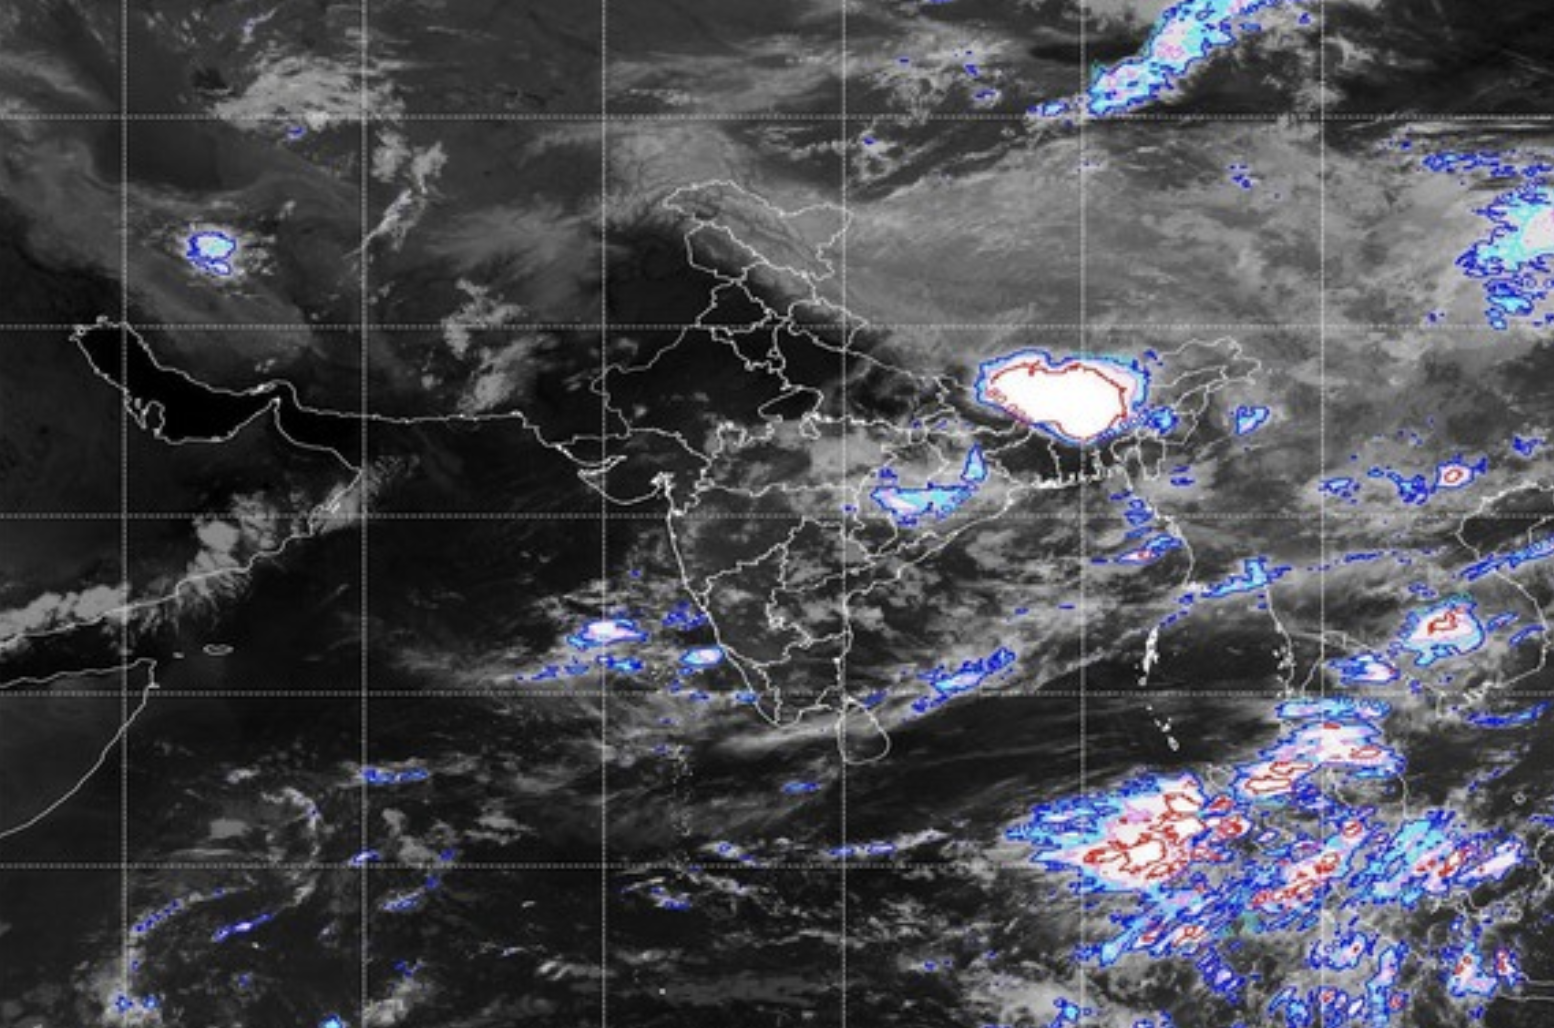 imd-predicts-light-to-moderate-rainfall-in-eastern-north-east-region-